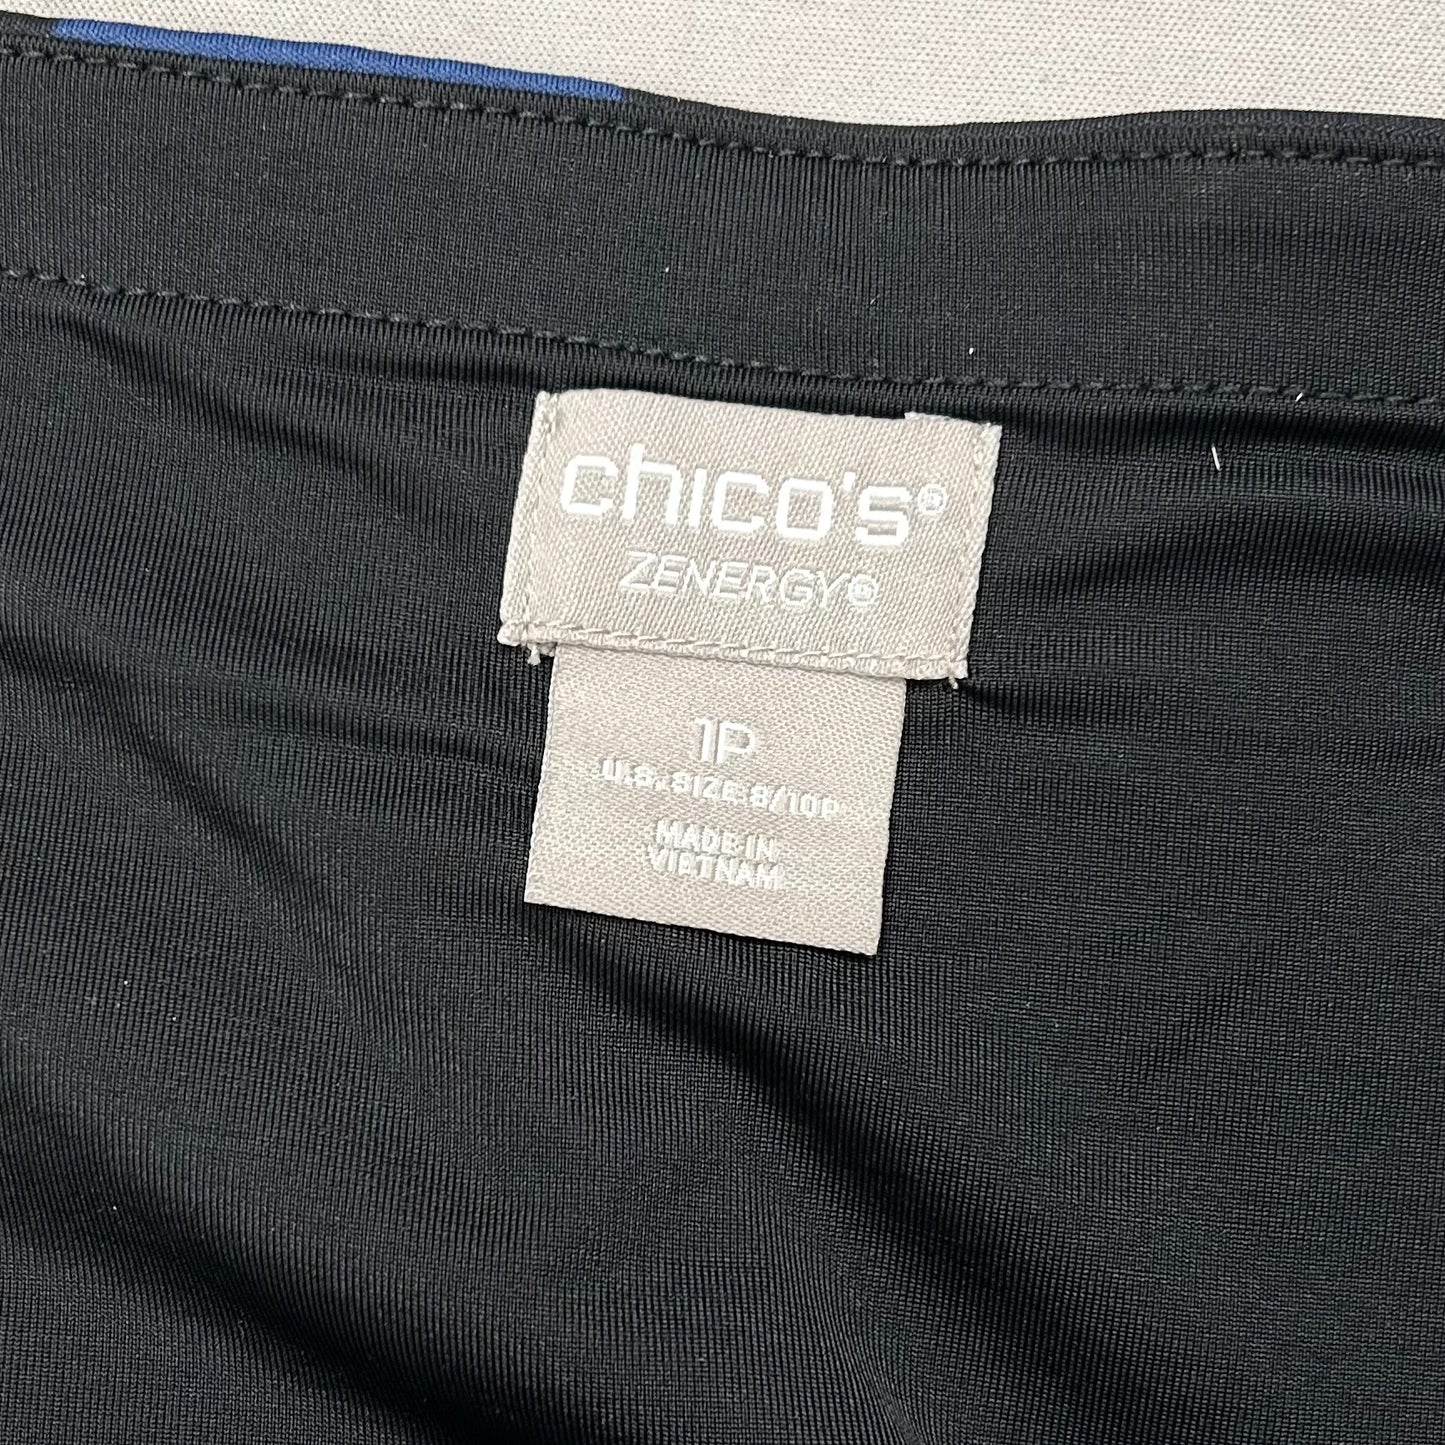 Athletic Leggings By Chicos  Size: M